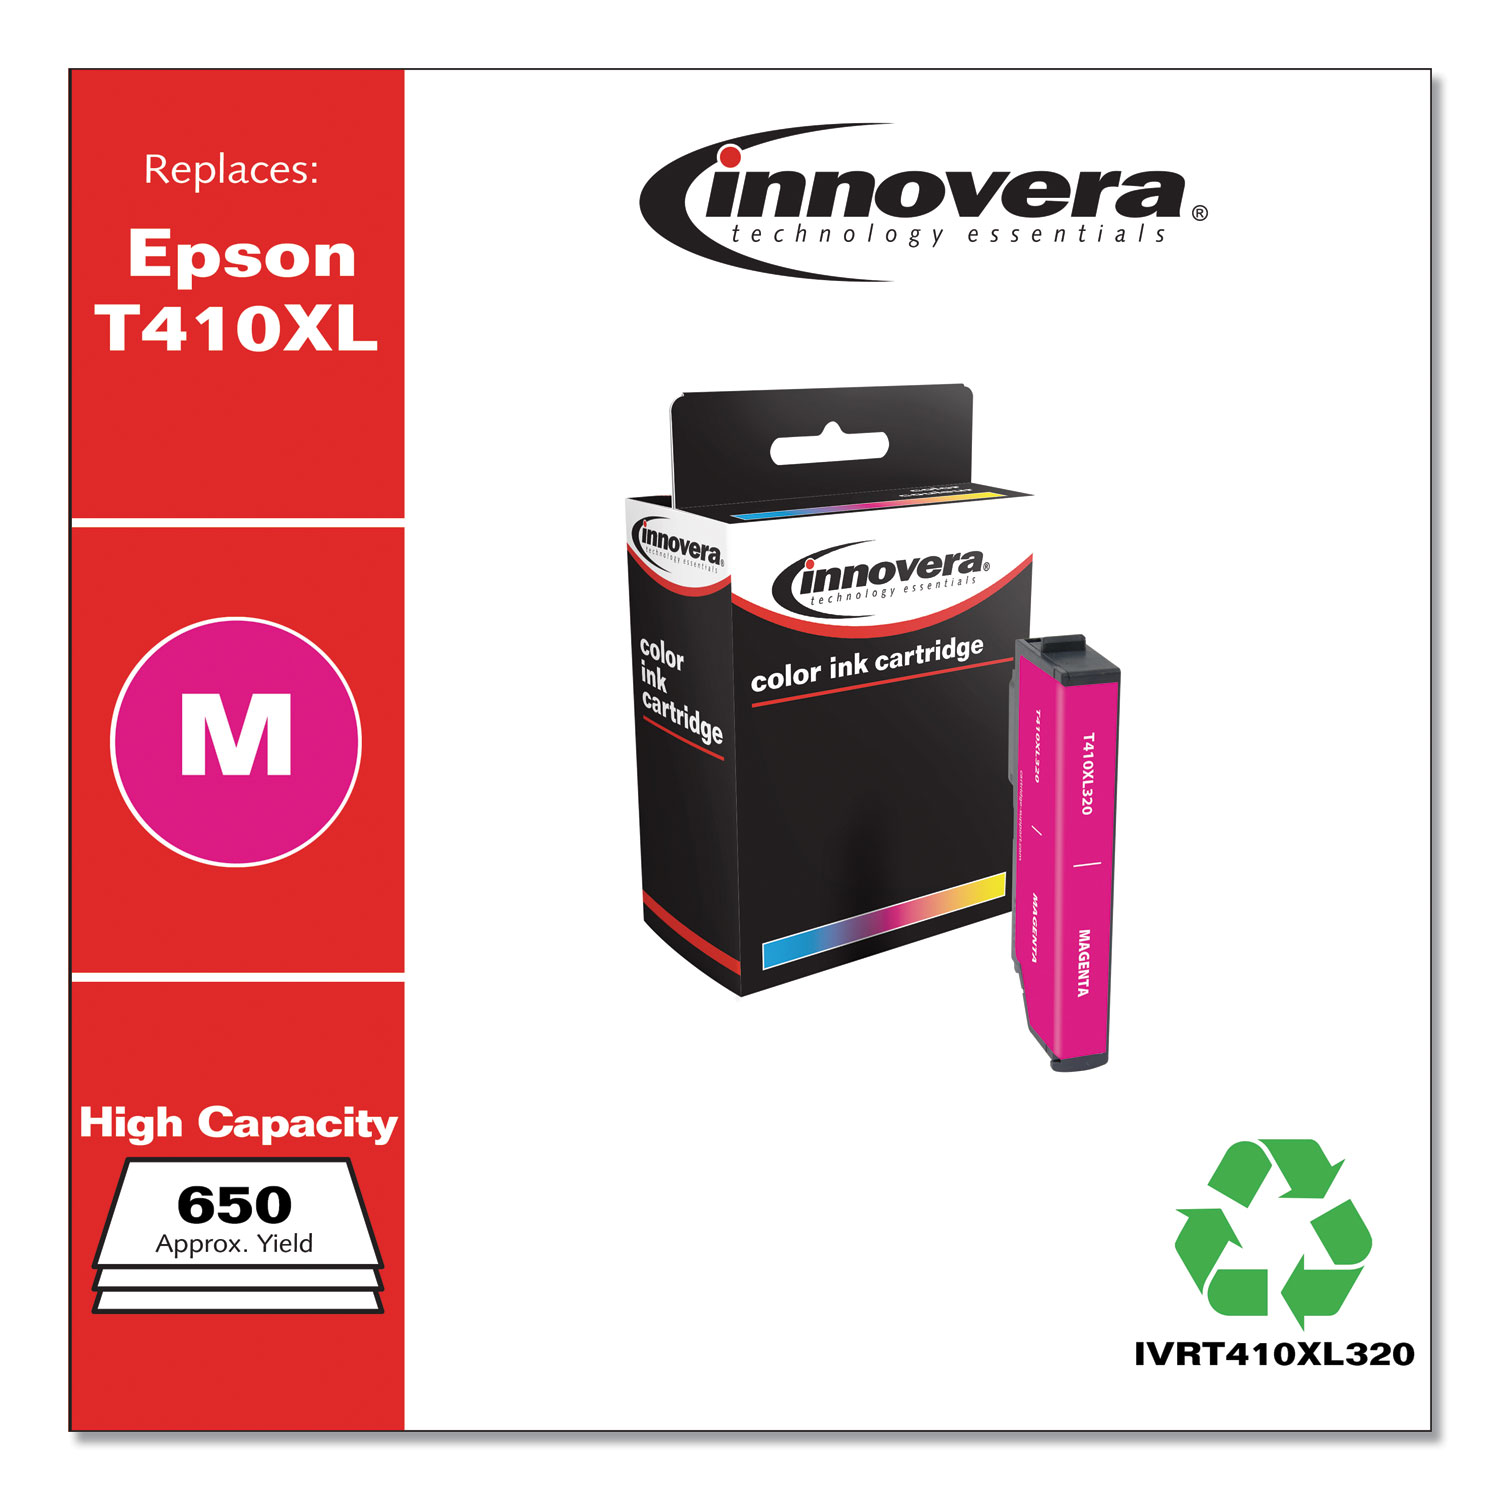  Innovera IVRT410XL320 Remanufactured Magenta High-Yield Ink, Replacement for Epson T410XL (T410XL320), 650 Page-Yield (IVRT410XL320) 